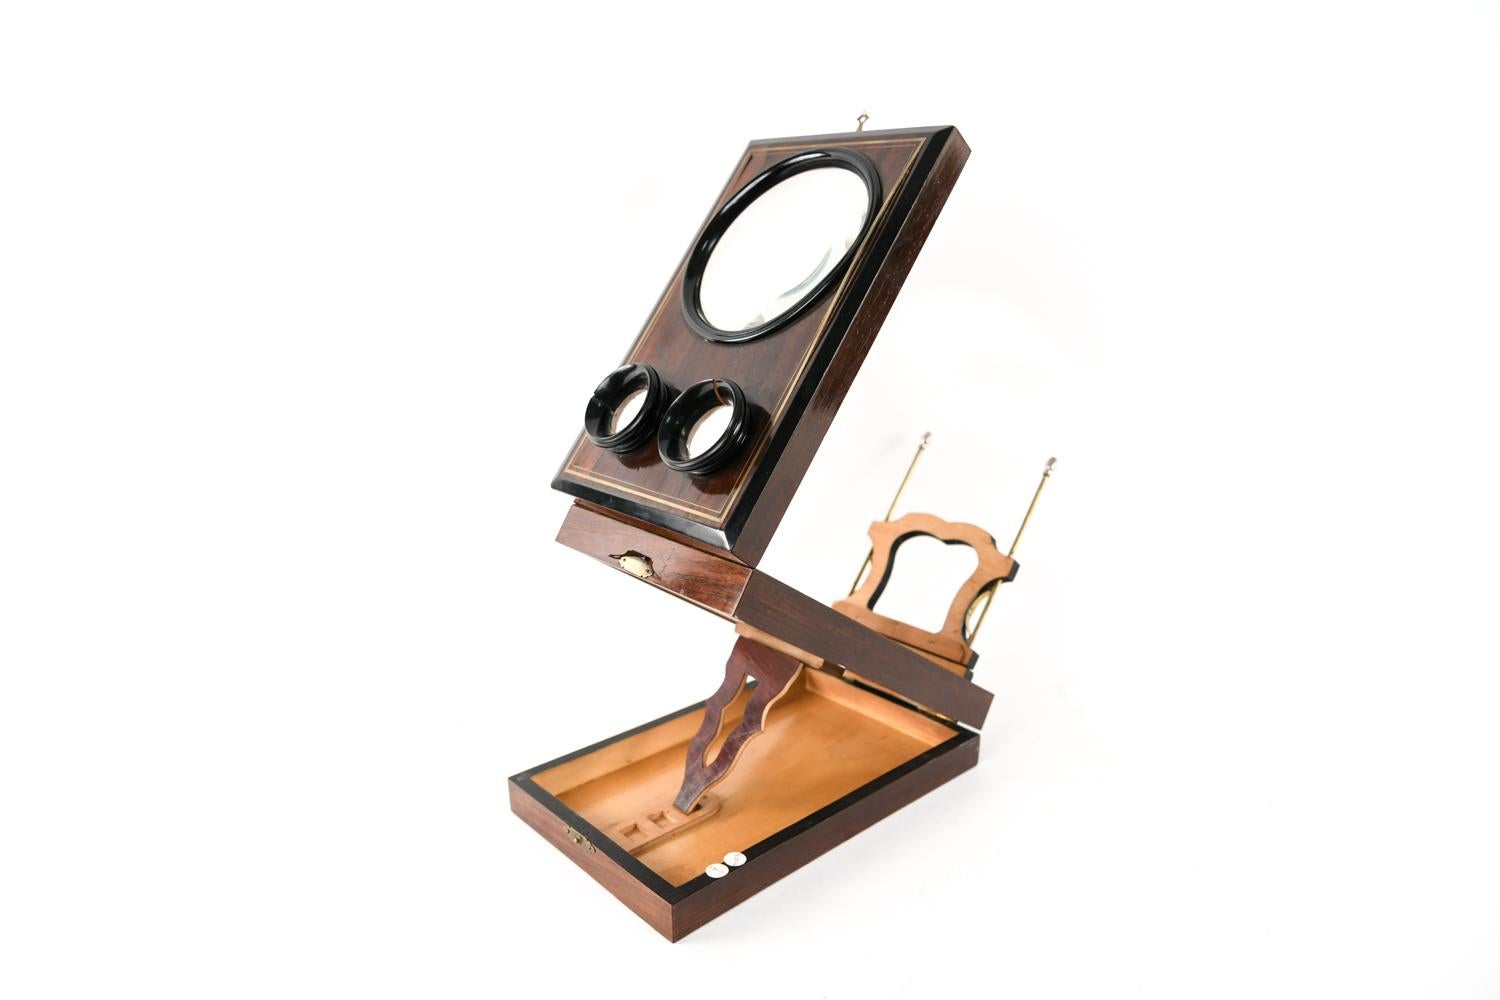 Finally, an antique object that's both beautiful and functional! This Victorian stereoscope features a rosewood case with brass inlay, ebonized trim and a movable-part interior. It would make a perfect desktop magnifying device!